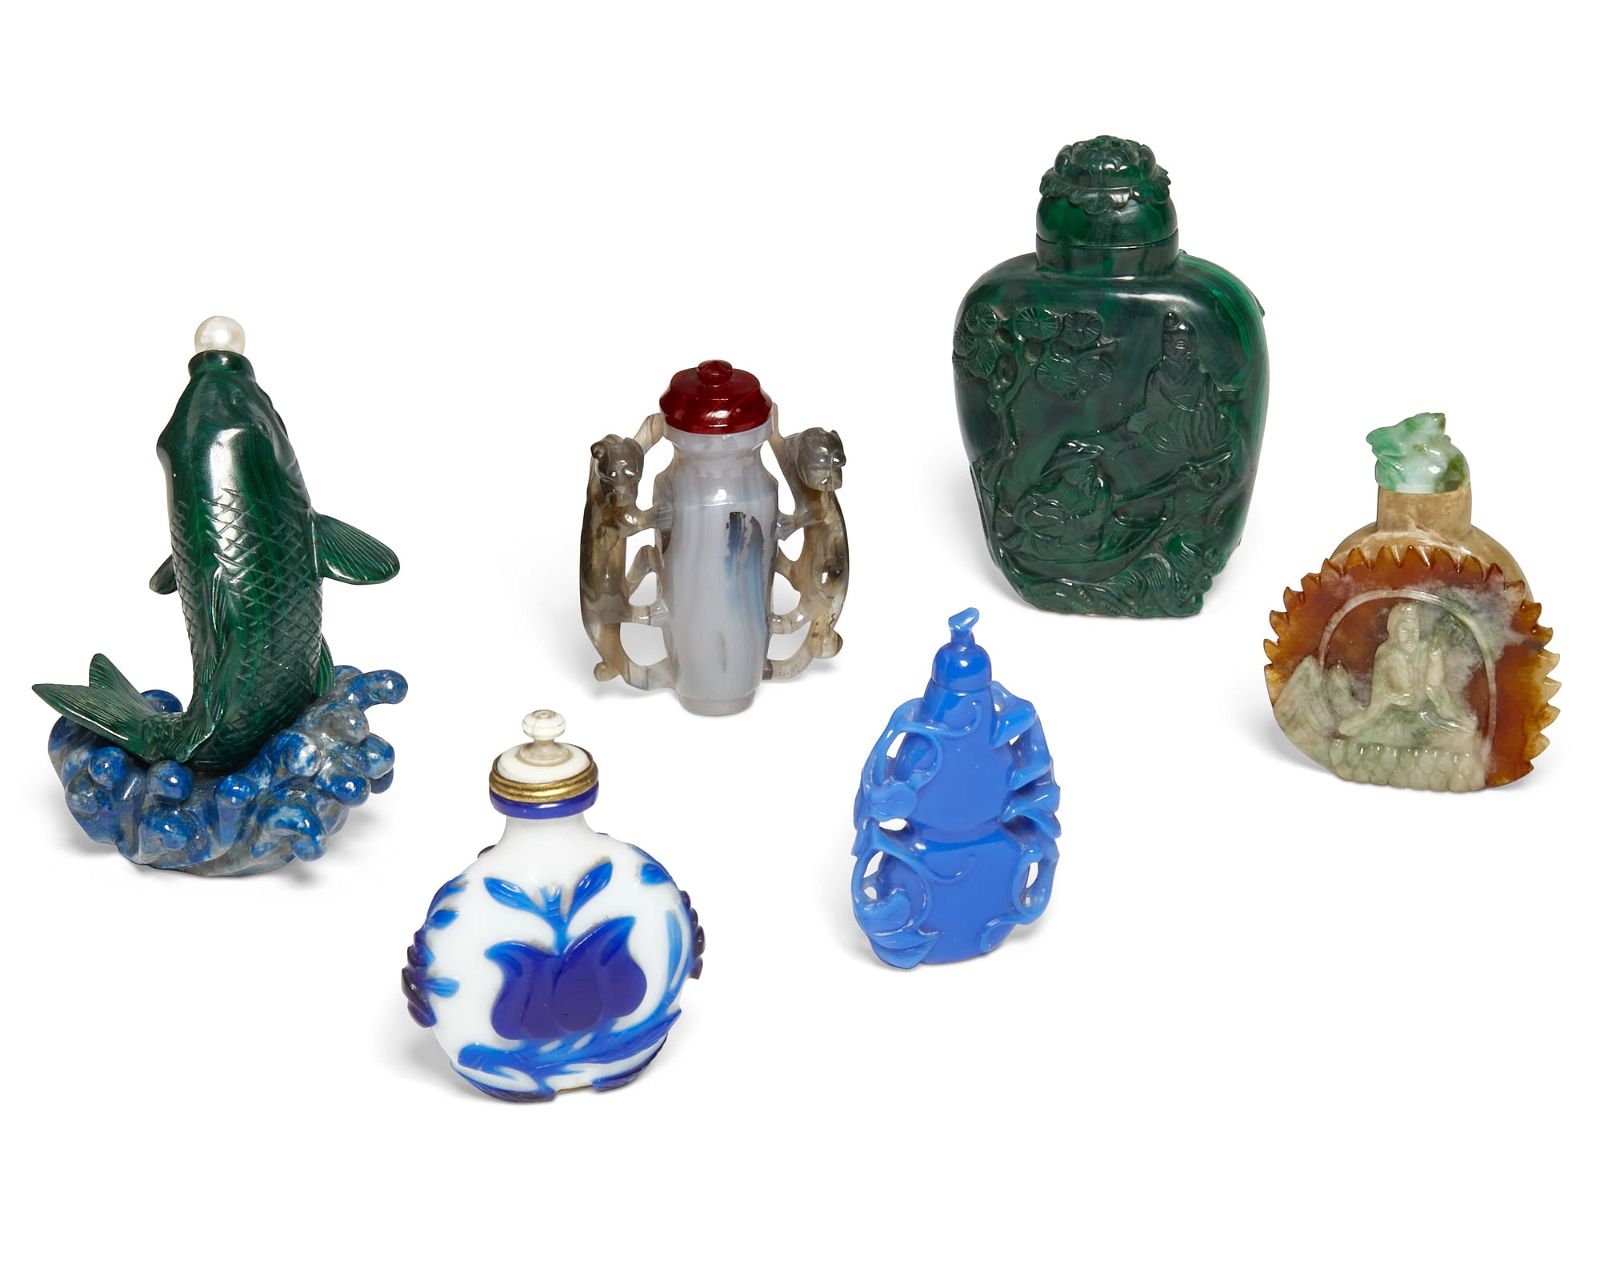 SIX CHINESE HARDSTONE AND GLASS